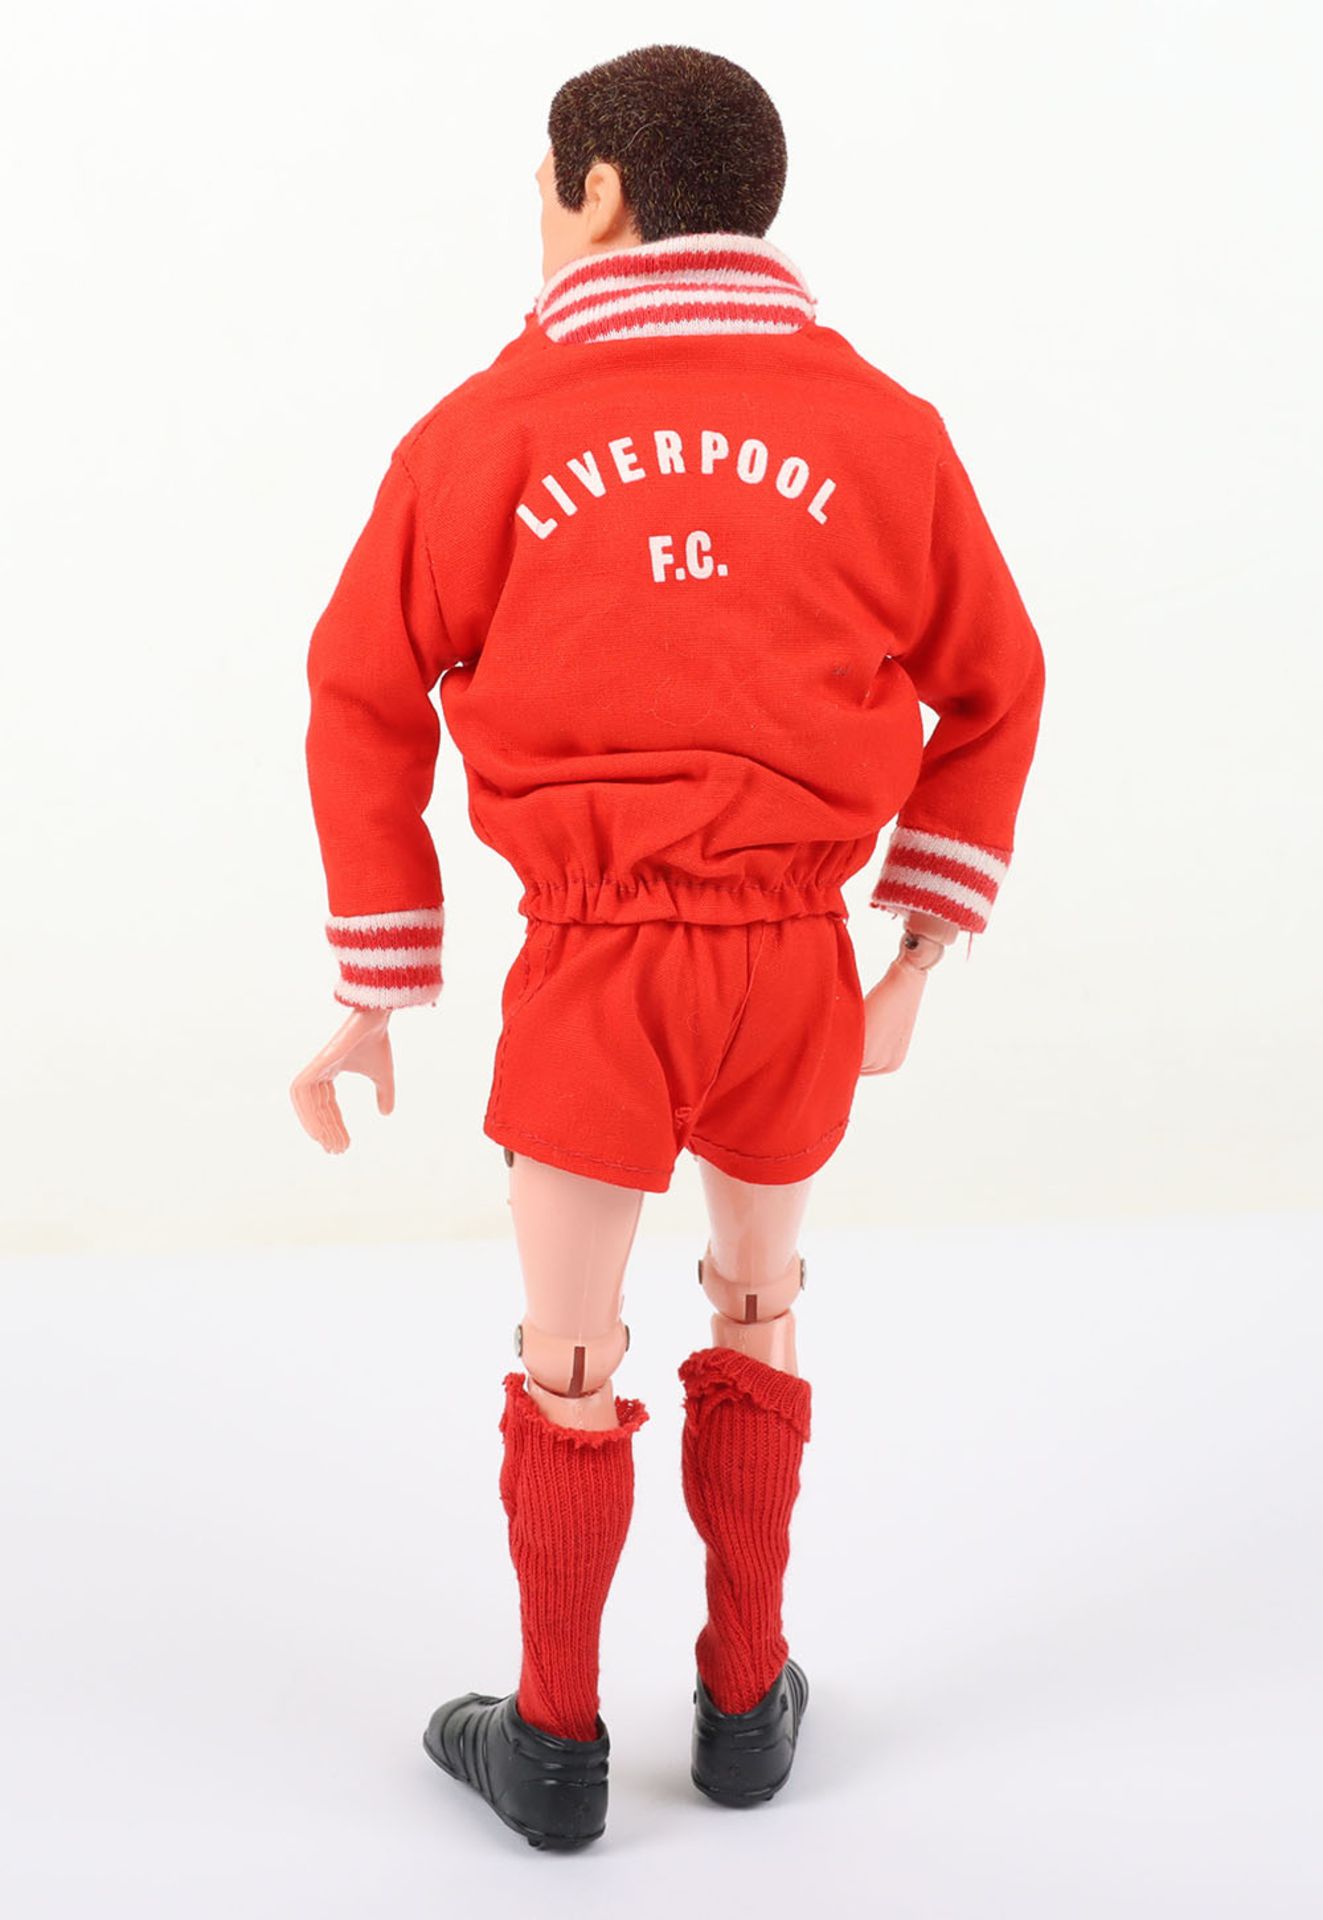 Vintage Action Man Famous Football Clubs Liverpool - Image 6 of 6